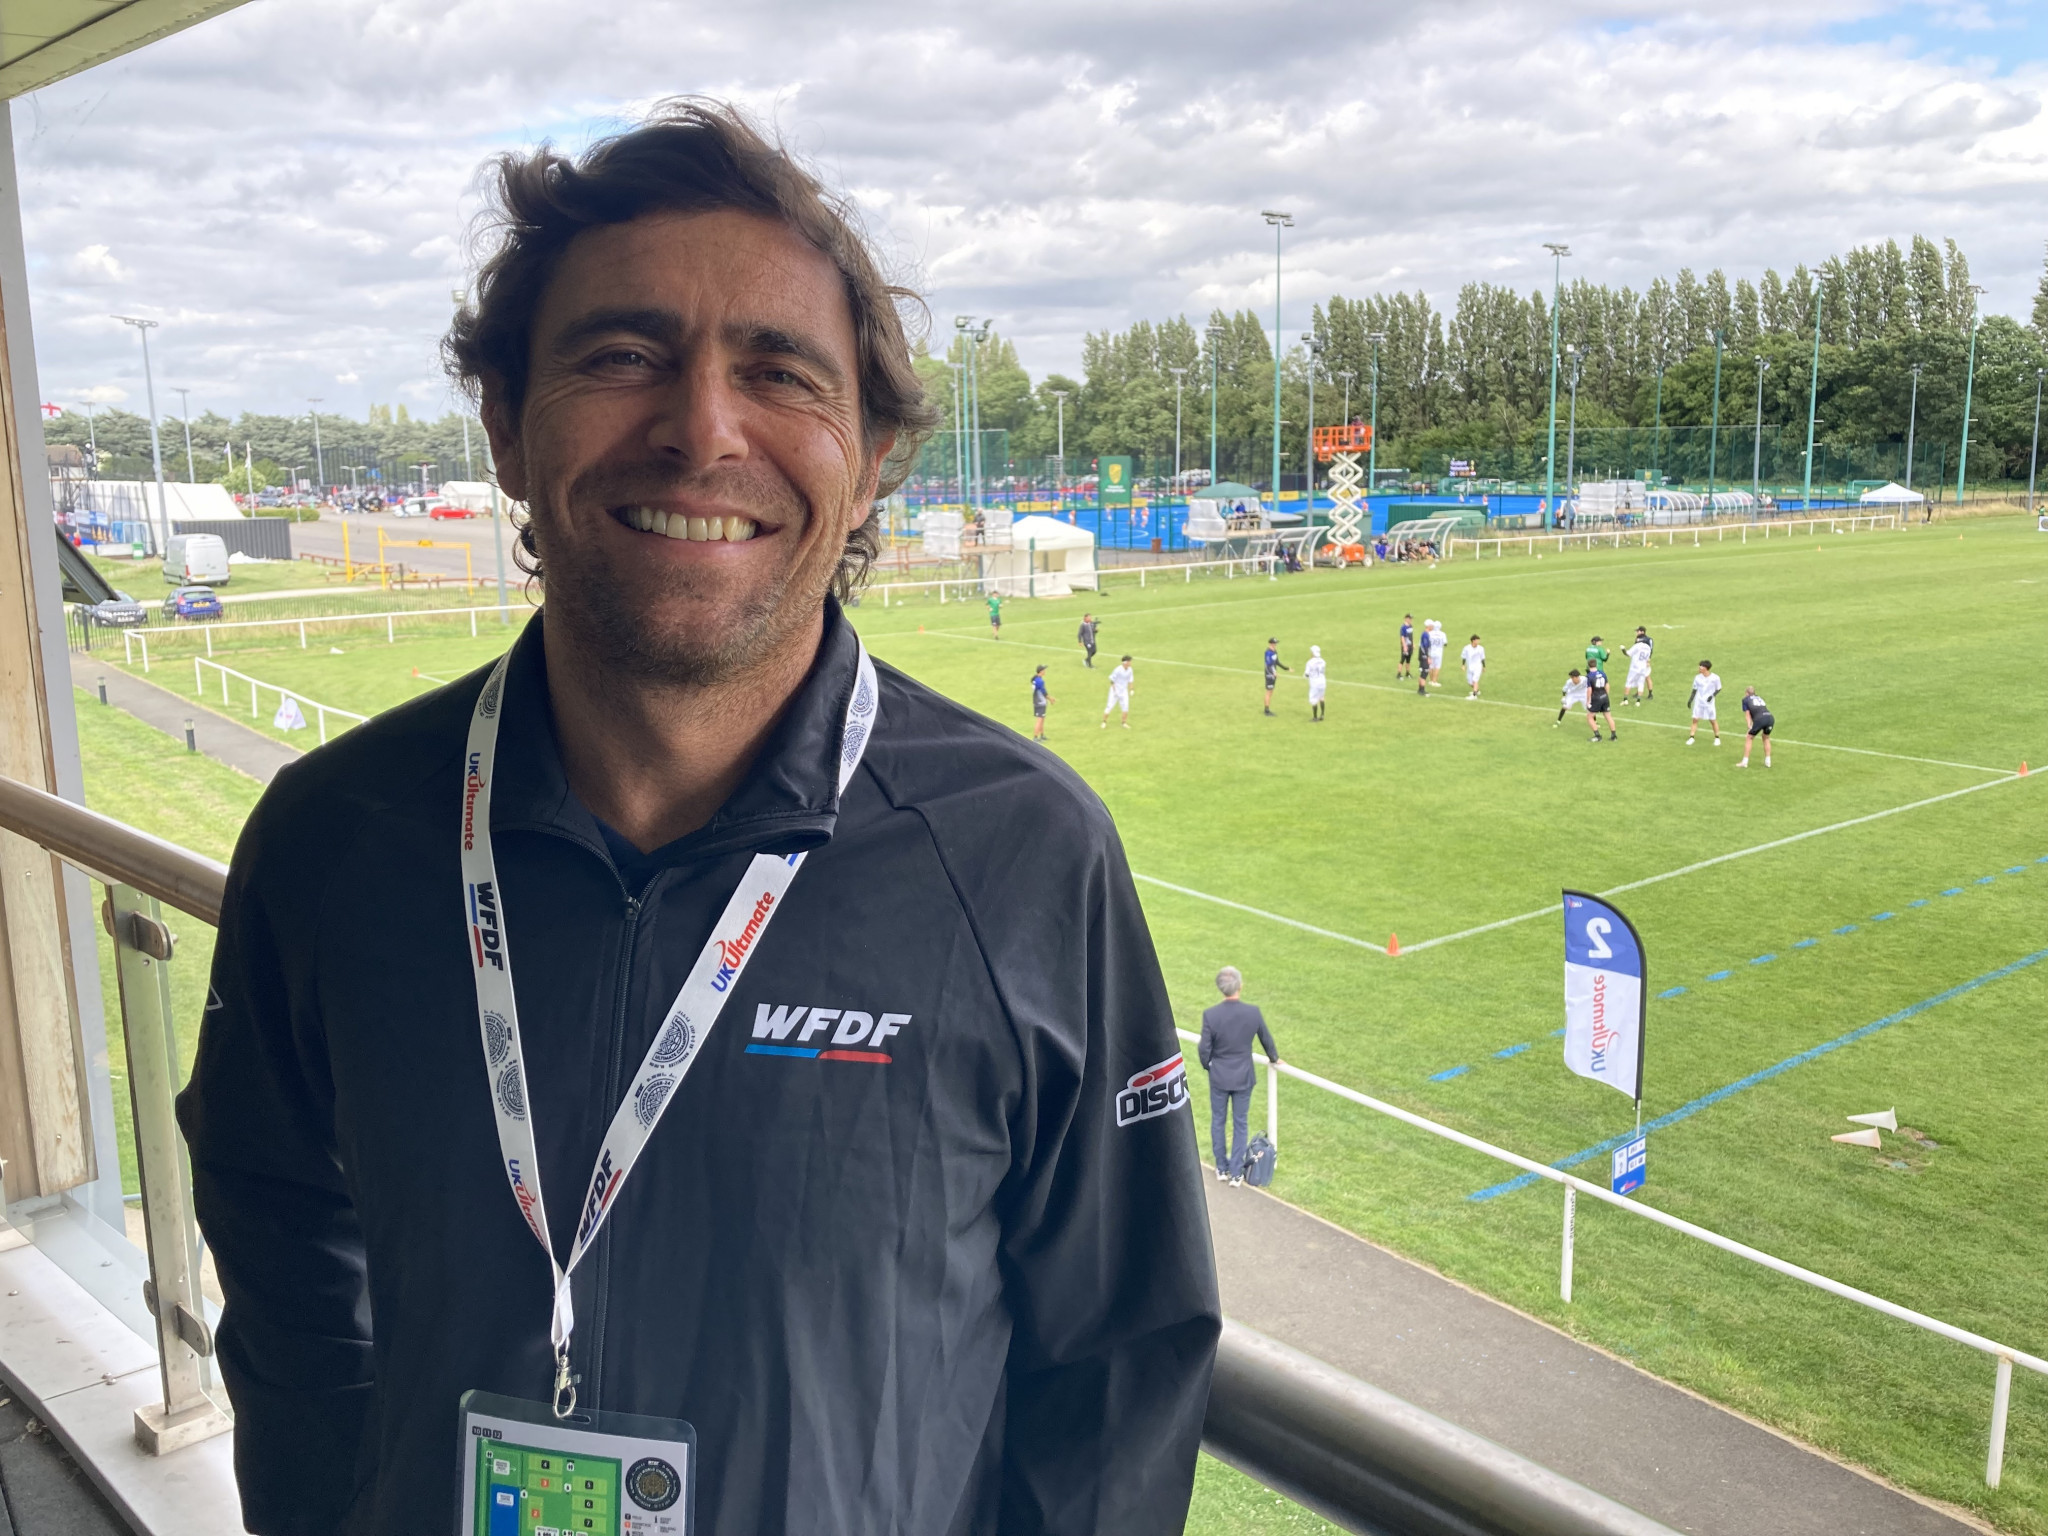 José Amoroso, chair of the WFDF Spirit of the Games Committee, said it was important to influence the behaviours of young children playing sport to ensure they pick up good habits ©WFDF